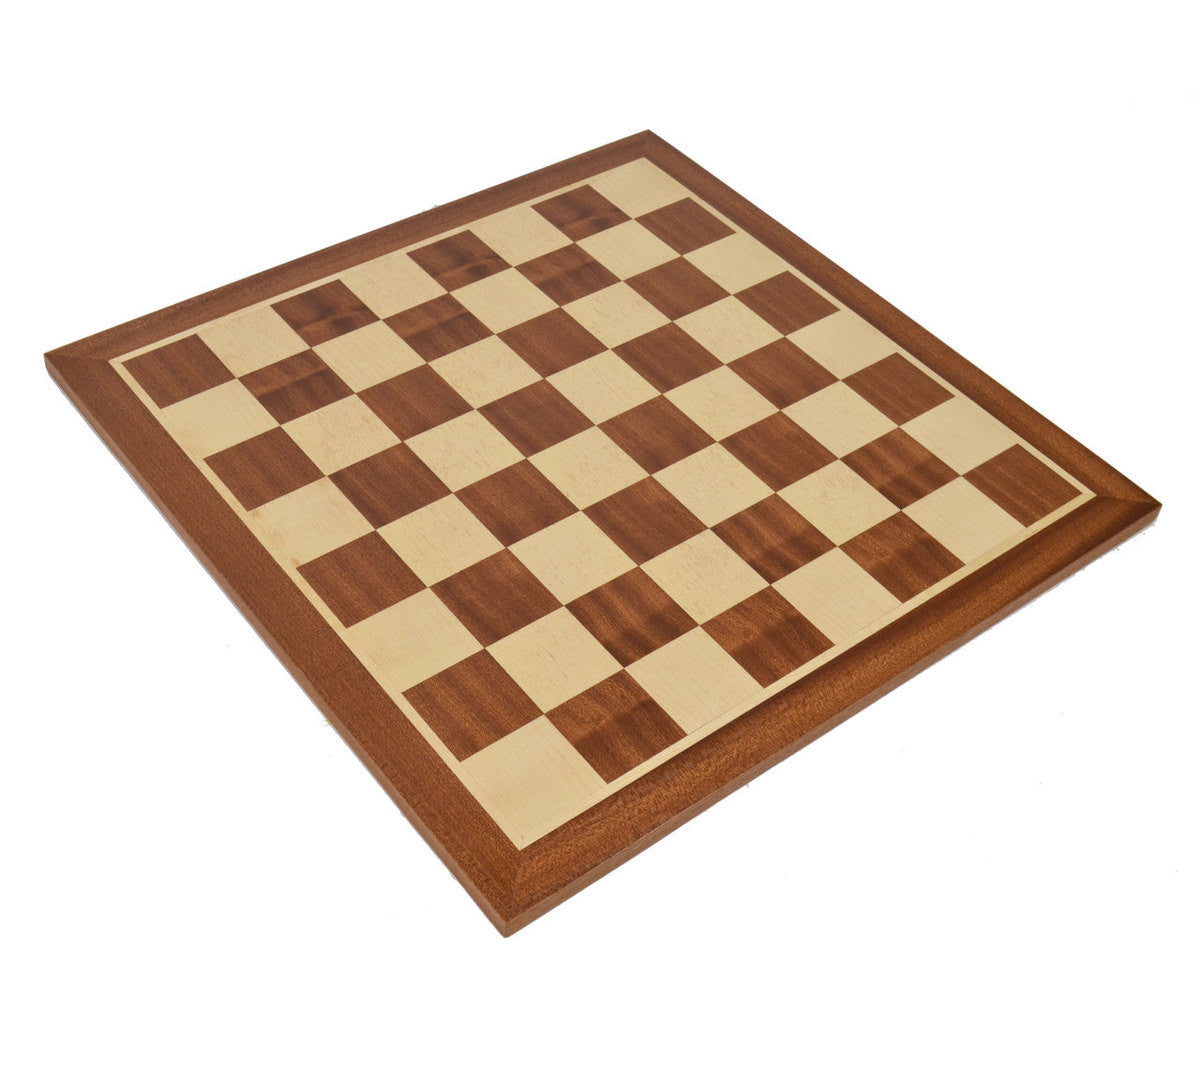 Mahogany Wood Chess Board with 2.125" Squares